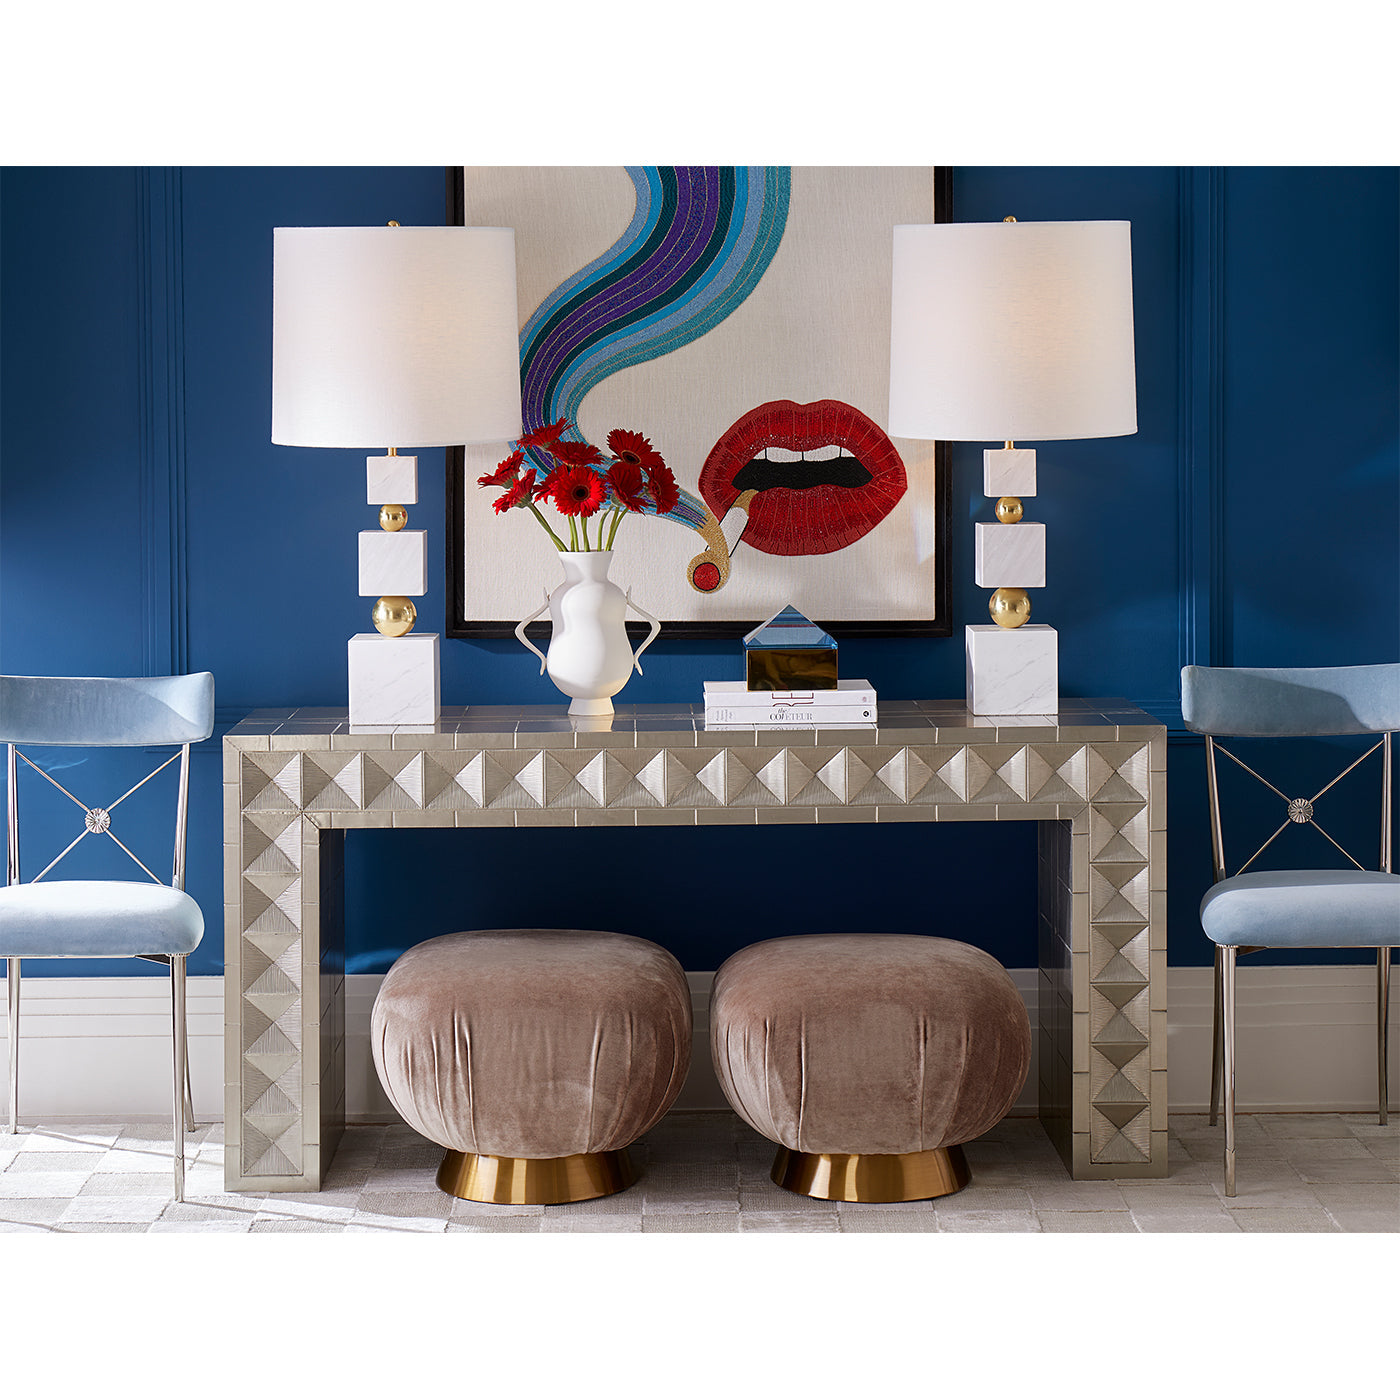 Load image into Gallery viewer, Talitha Waterfall Console Console Table Jonathan Adler     Four Hands, Mid Century Modern Furniture, Old Bones Furniture Company, Old Bones Co, Modern Mid Century, Designer Furniture, https://www.oldbonesco.com/
